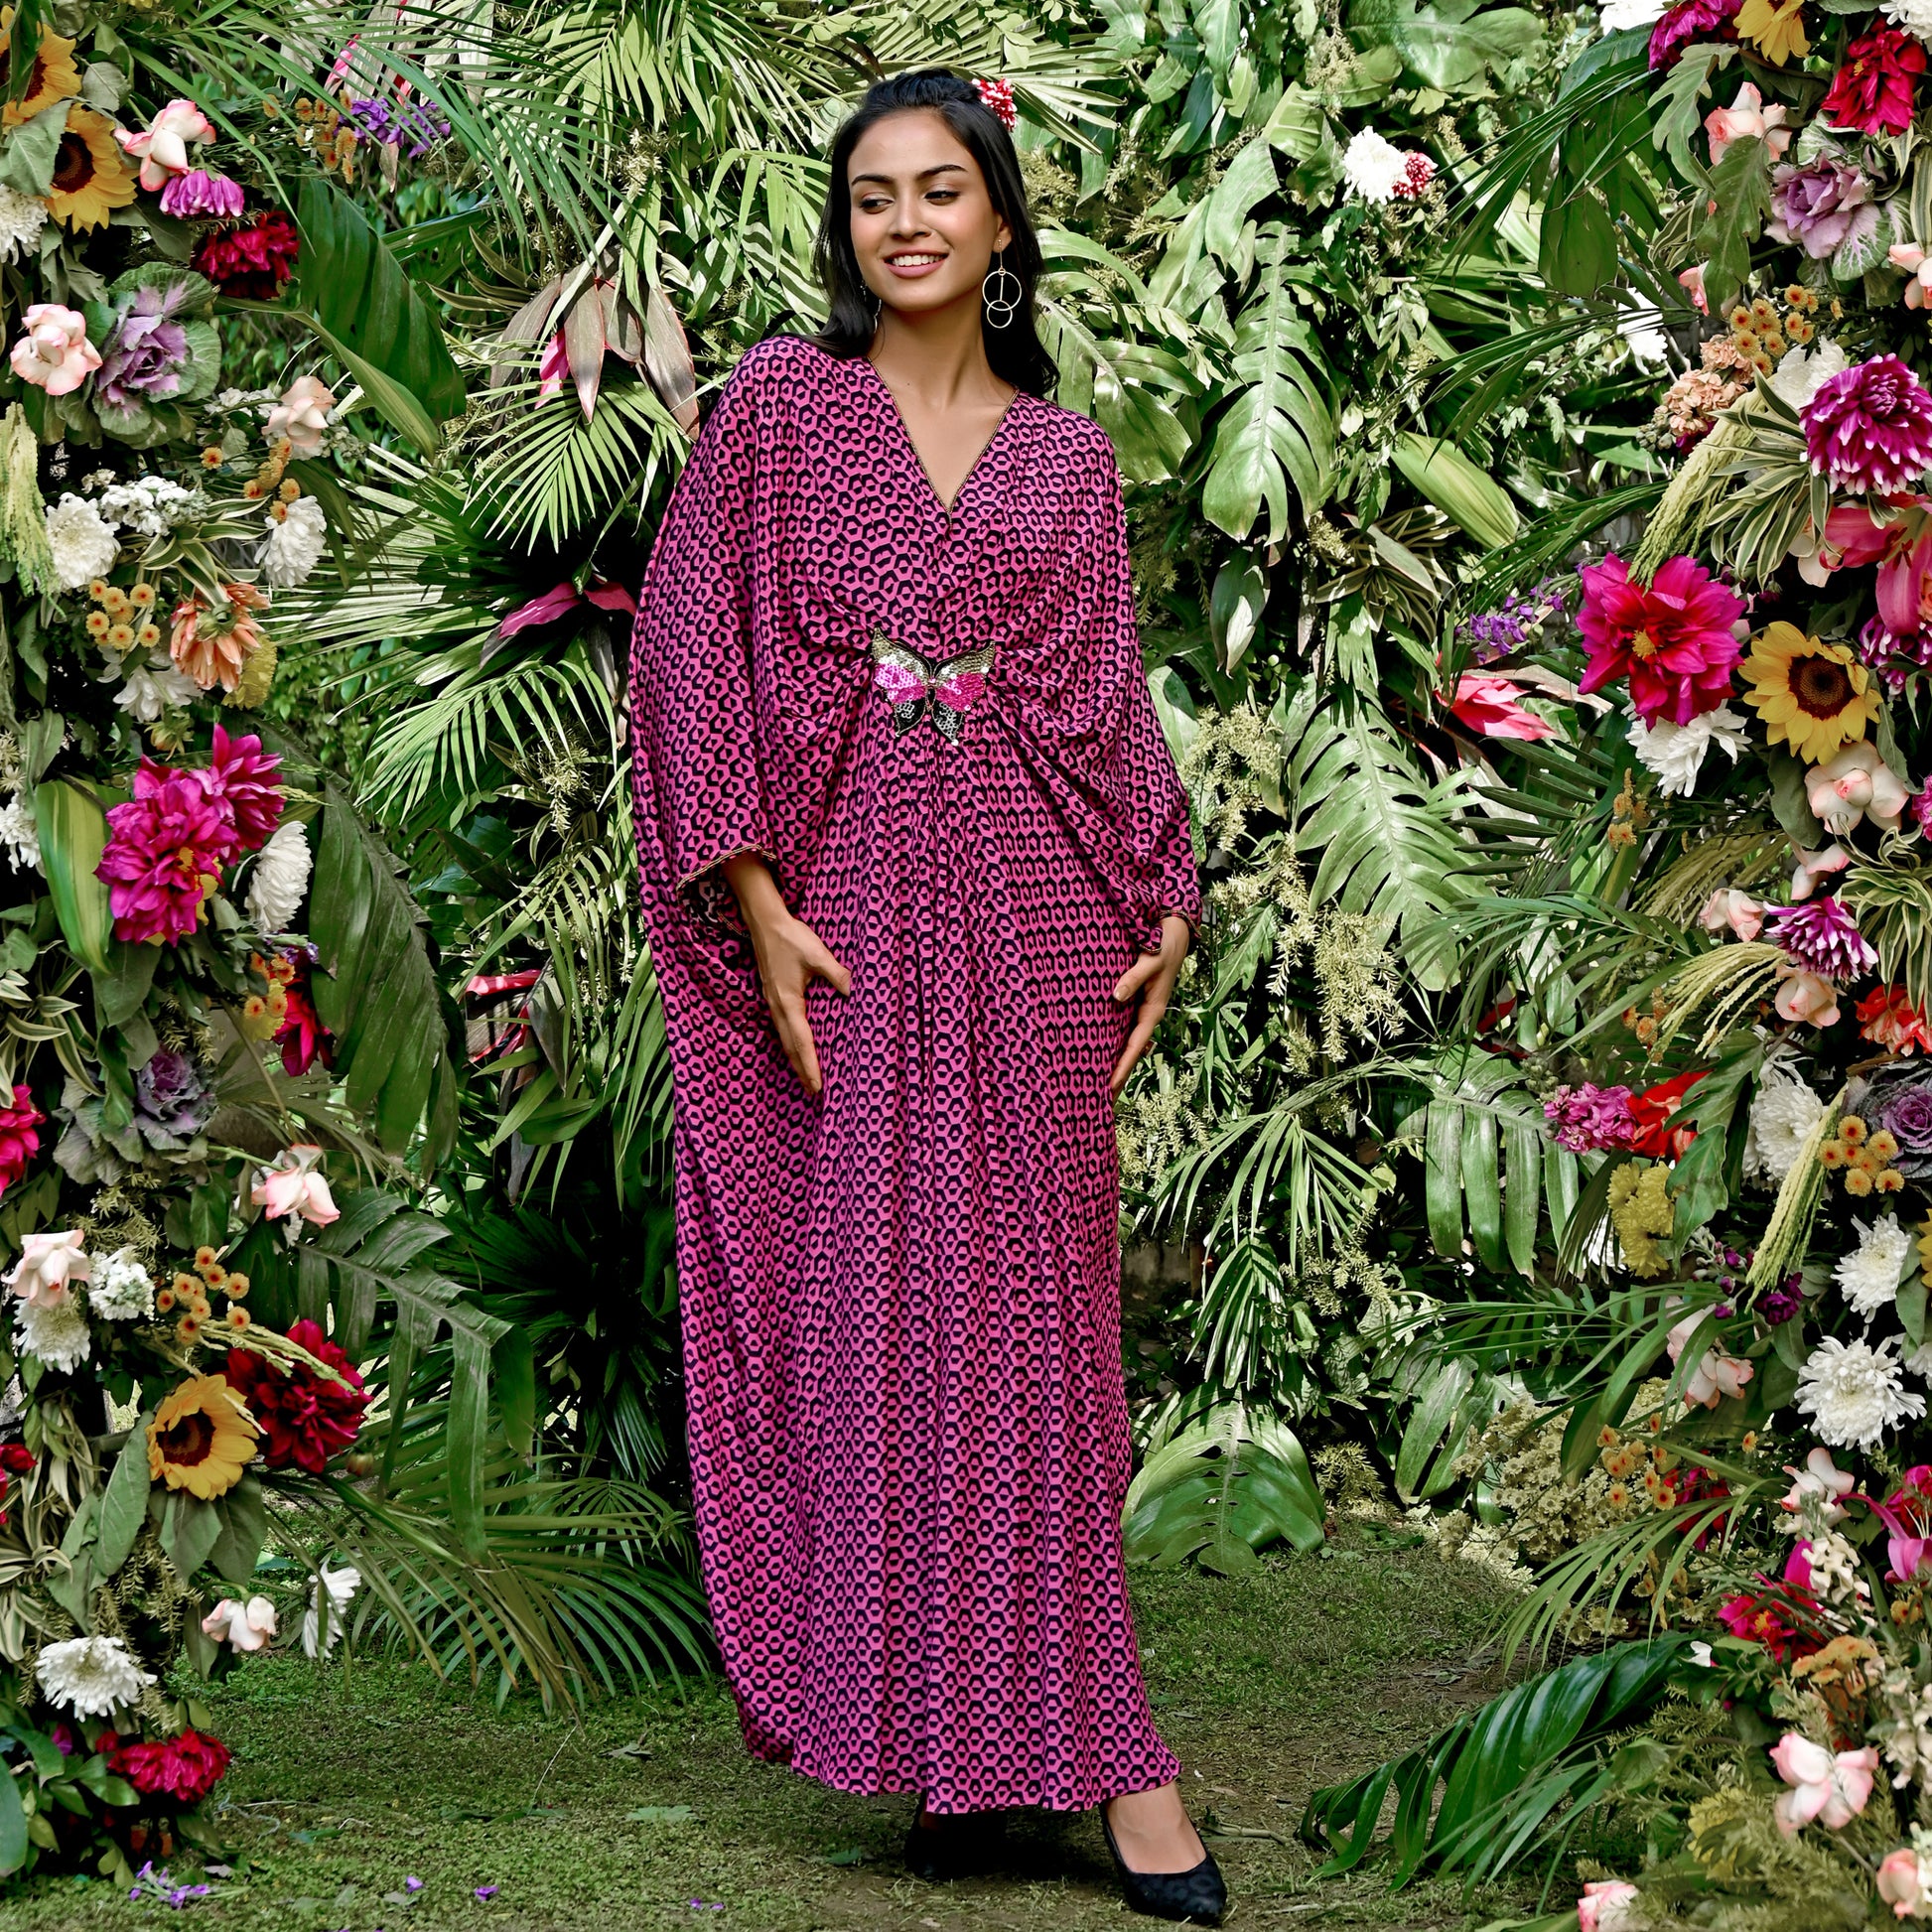 Image of Look stunning in this MAGENTA HONEYCOMB PRINT SILK FULL LENGTH KAFTAN WITH BUTTERFLY MOTIF from our Kaftan Collection. Crafted from lightweight silk, this full-length kaftan is decorated with an intricately patterned honeycomb print and a delicate butterfly motif. It's sure to elevate your formal wardrobe. From savoirfashions.com